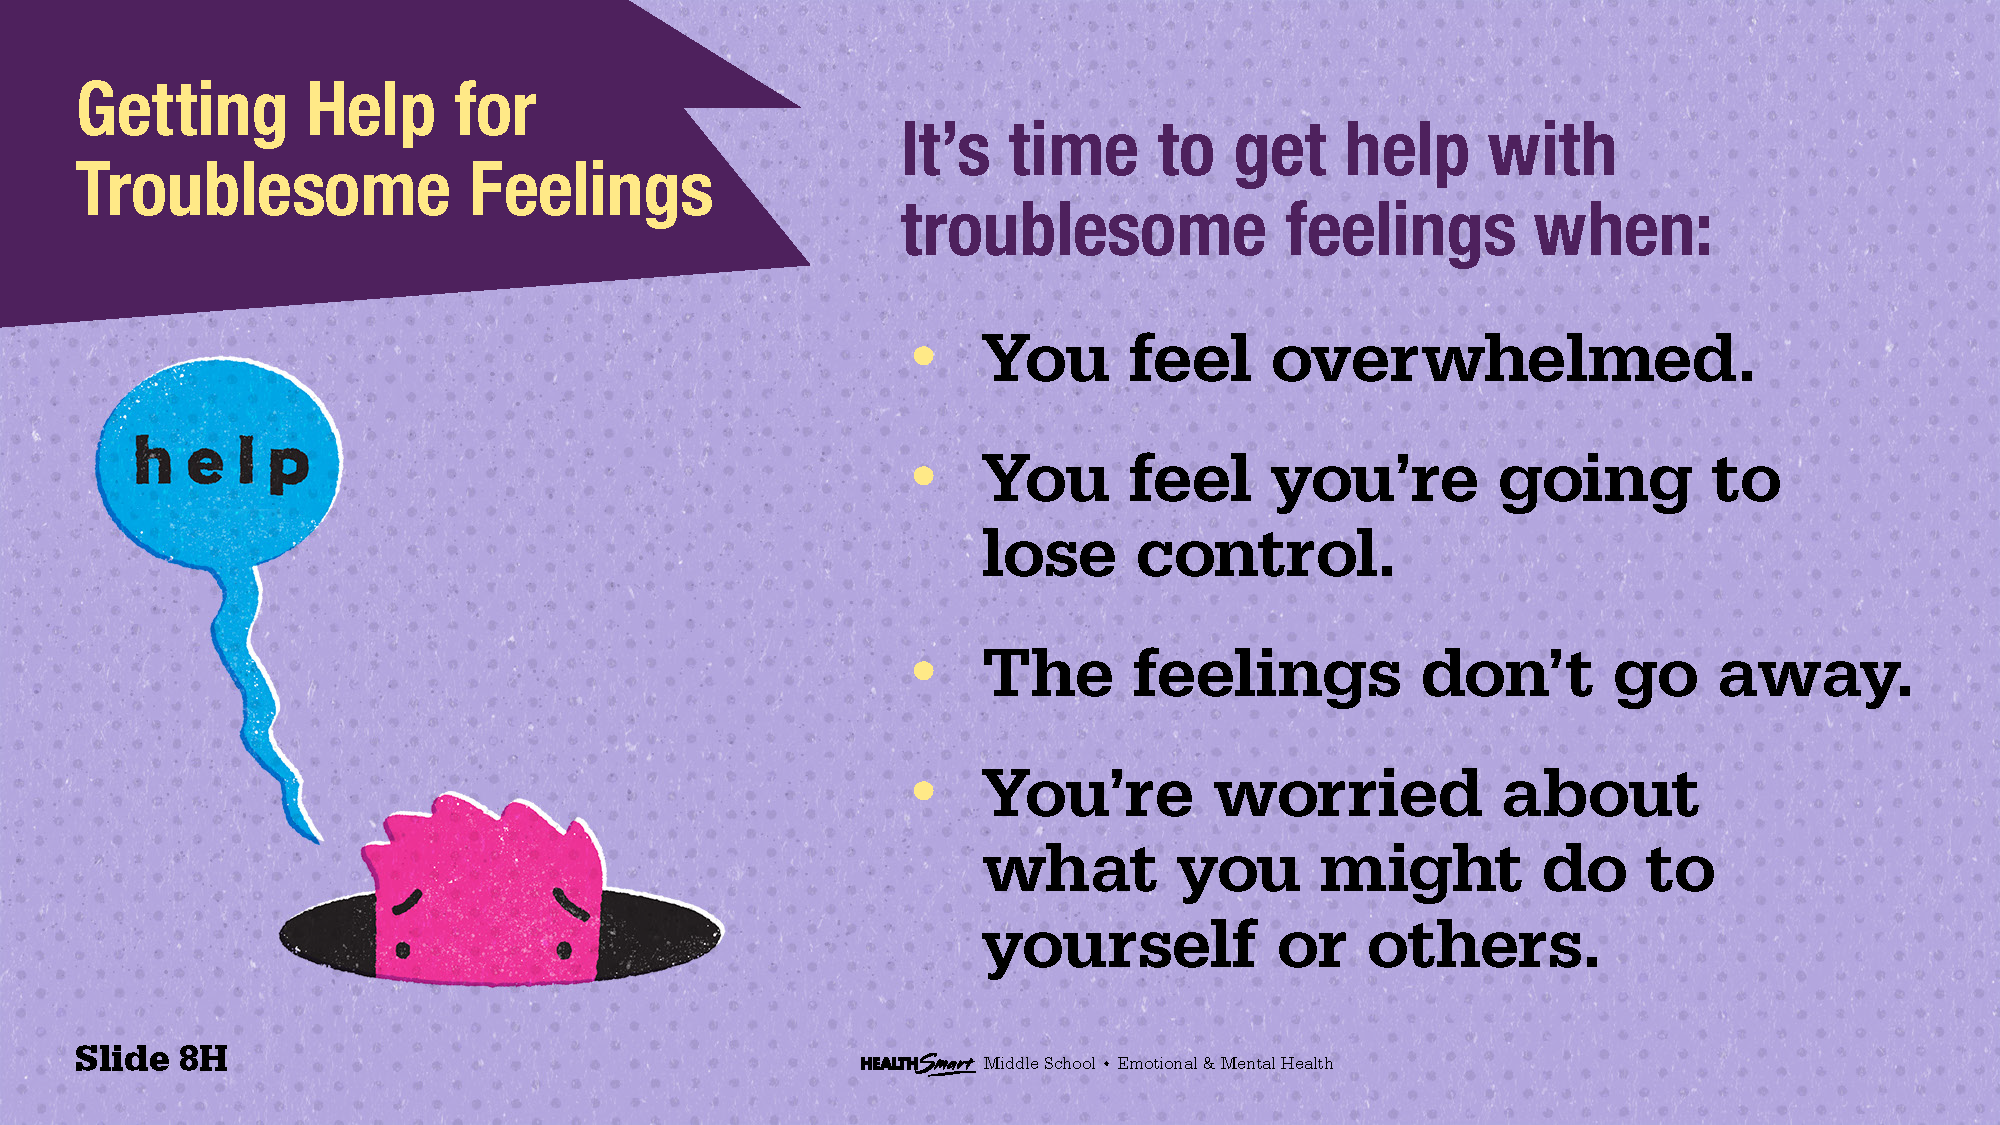 a list of warning signs that indicate it is time to get help for troublesome feelings